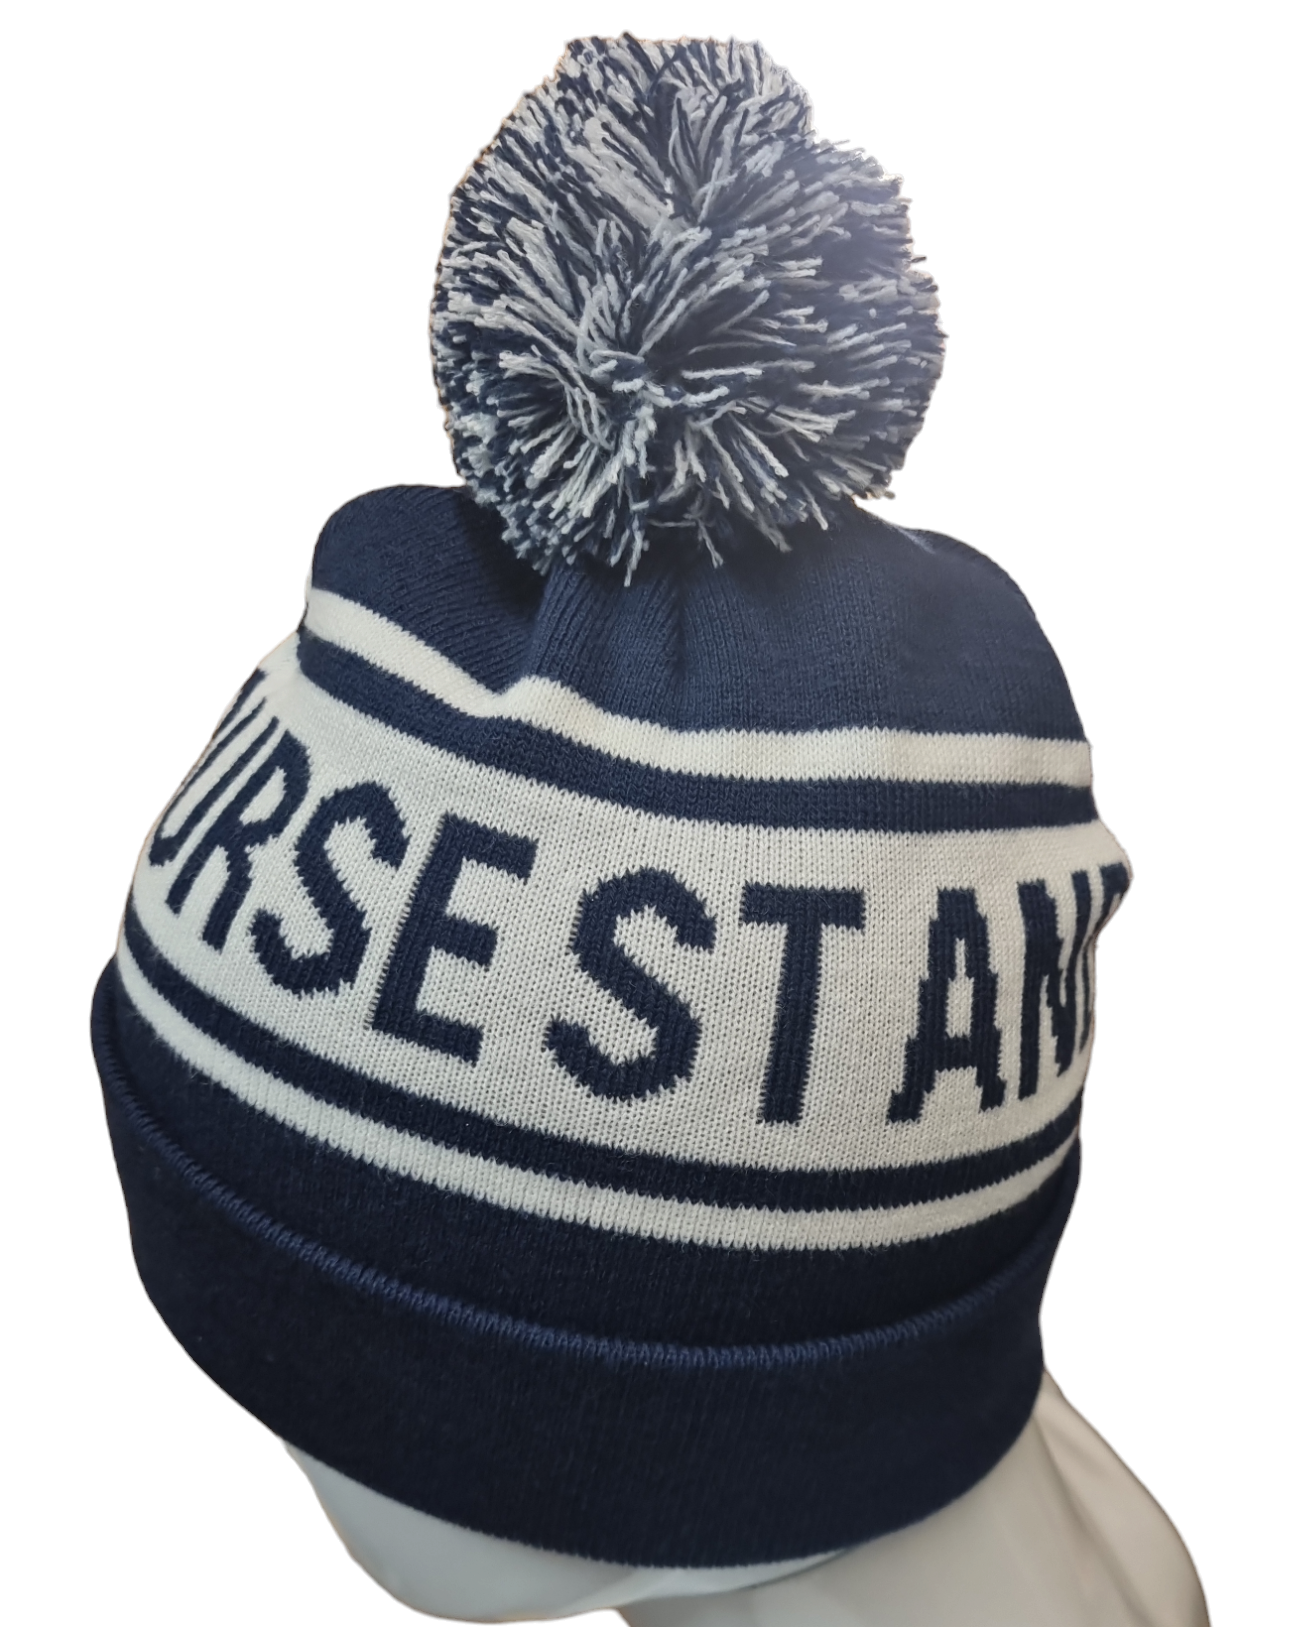 New - Old Course Scripted Beanie Navy/White